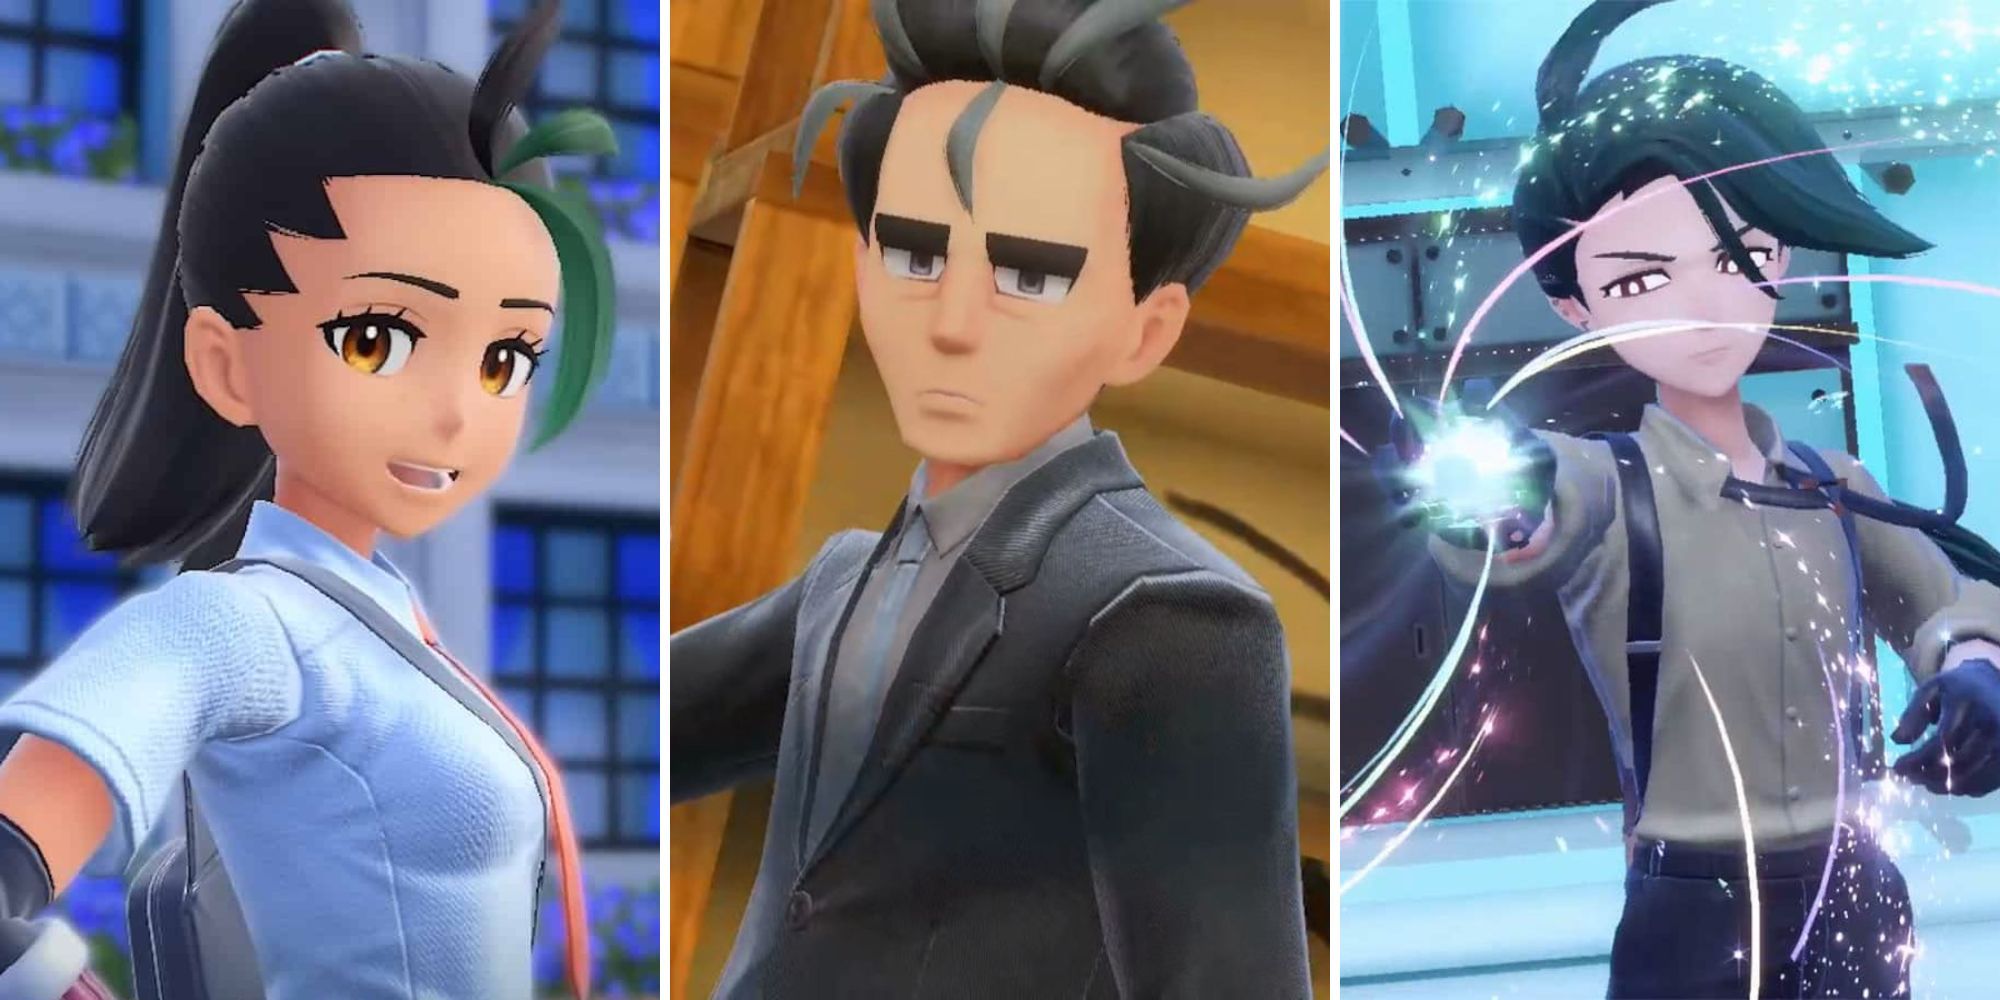 Grid of the characters Nemona, Larry, and Rika from Pokemon Scarlet & Violet 